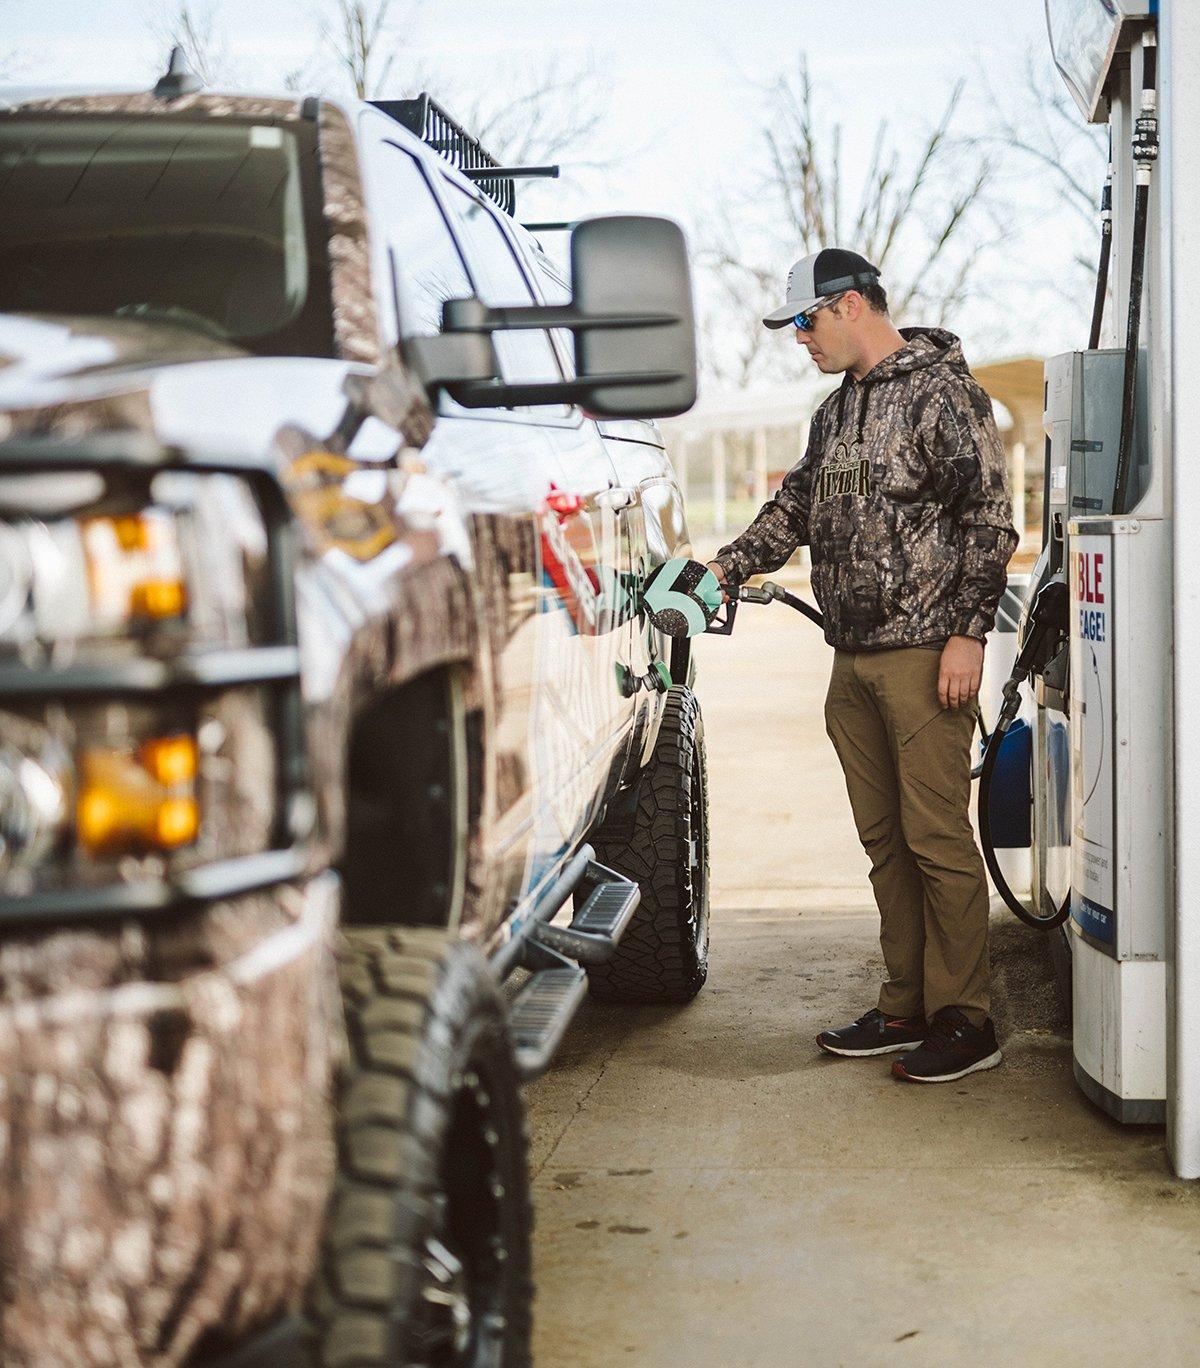 Realtree's Tyler Jordan gasses up during a recent road trip. Image by Hunter Phelps/Realtree Road Trips